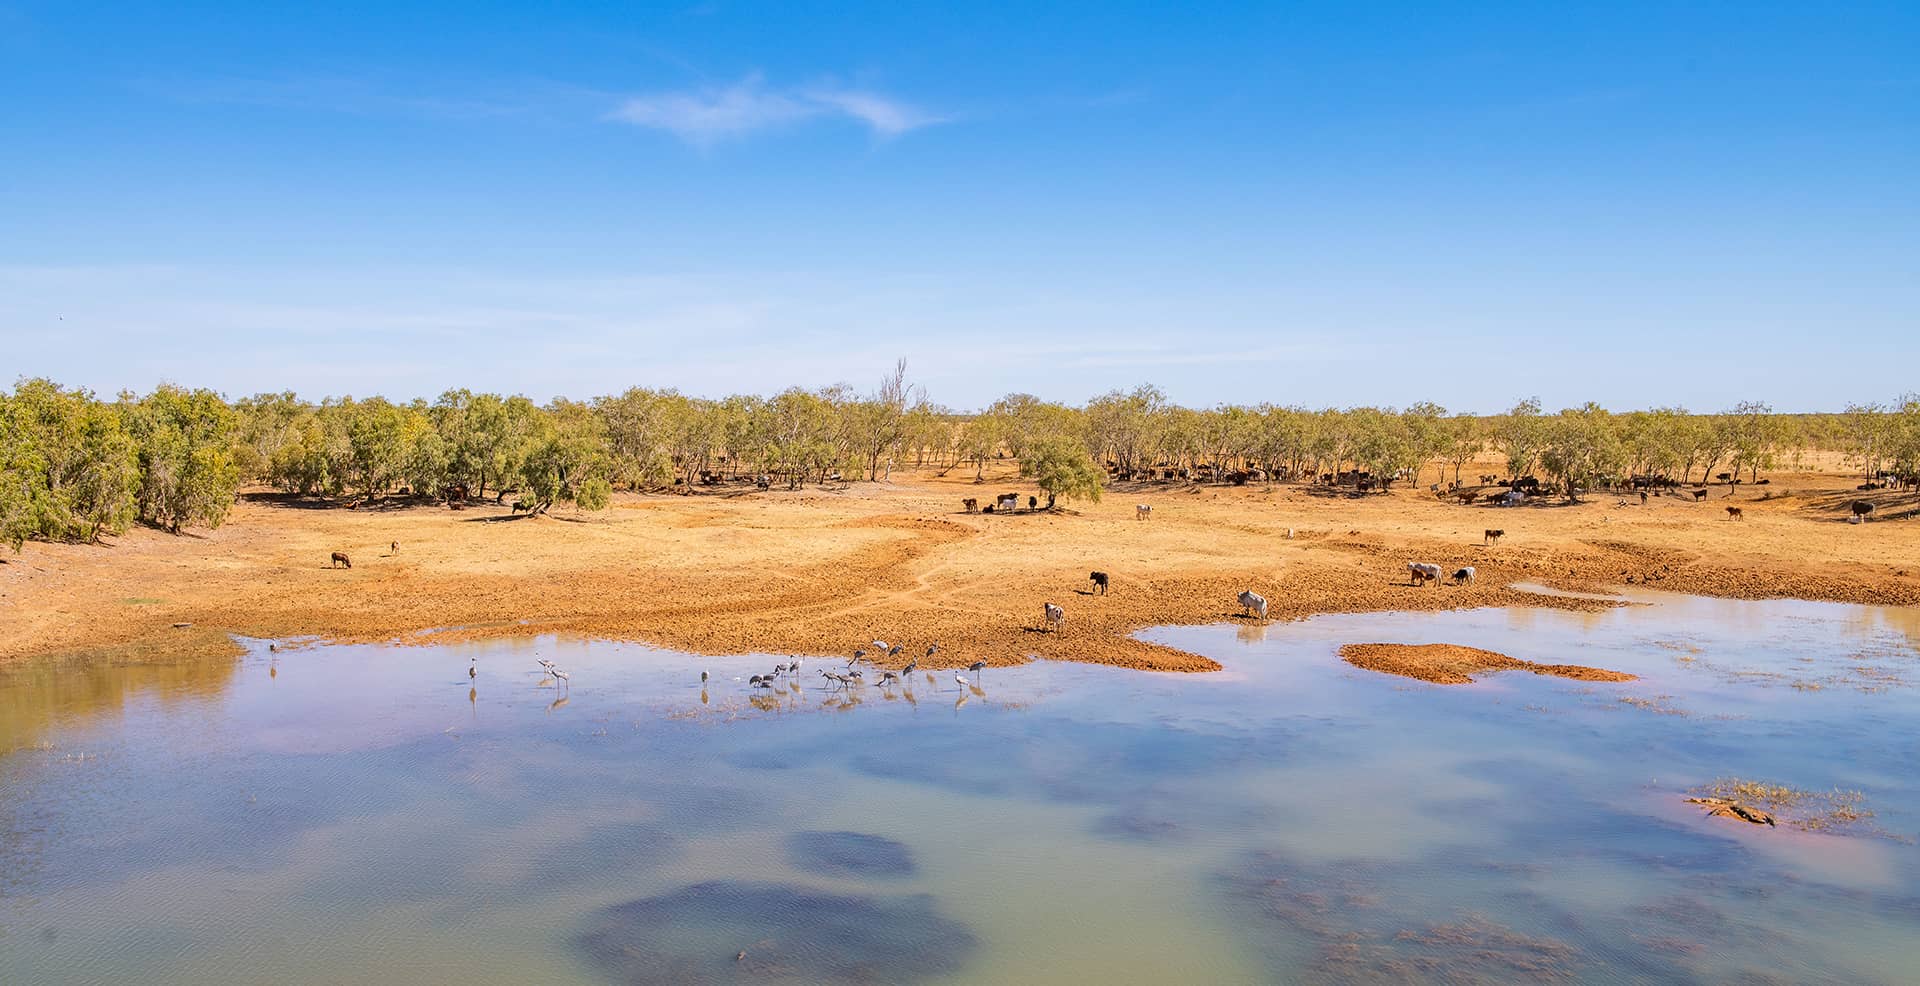 Hero Cattle rest on the banks of the Fitzroy River, with shade & access to water. The Kimberley is cattle country